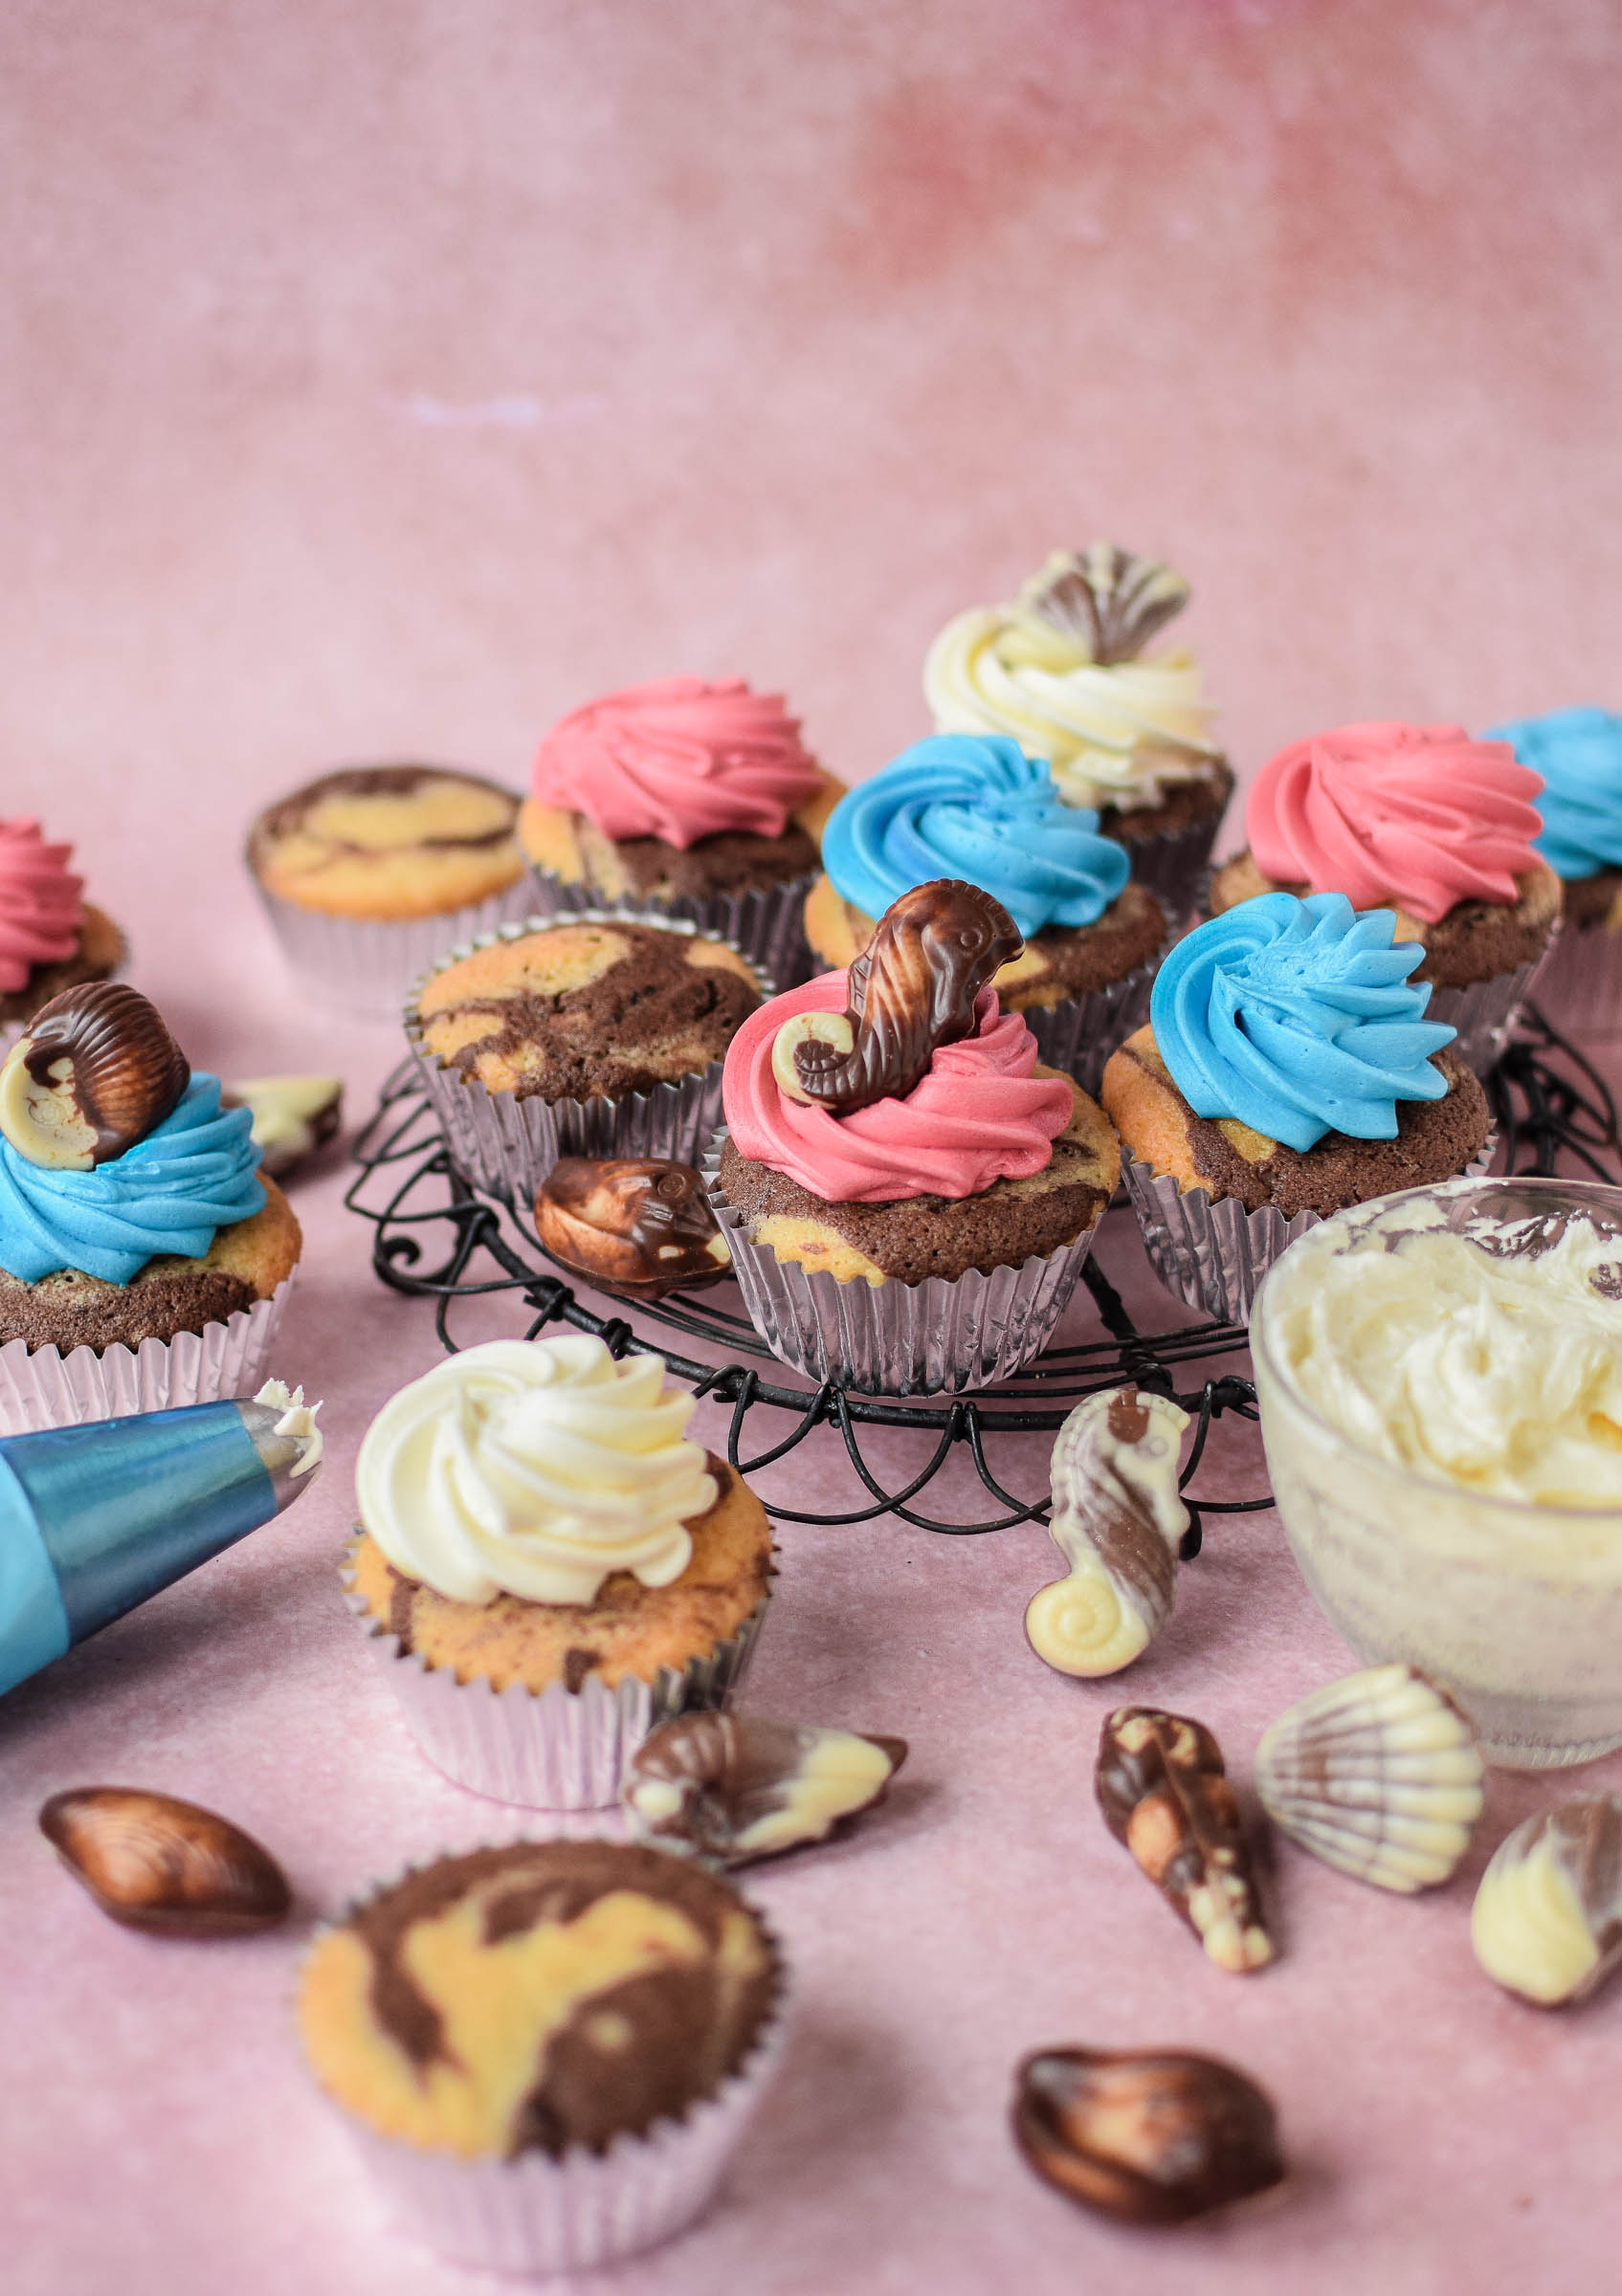 How to Make Marble Cupcakes